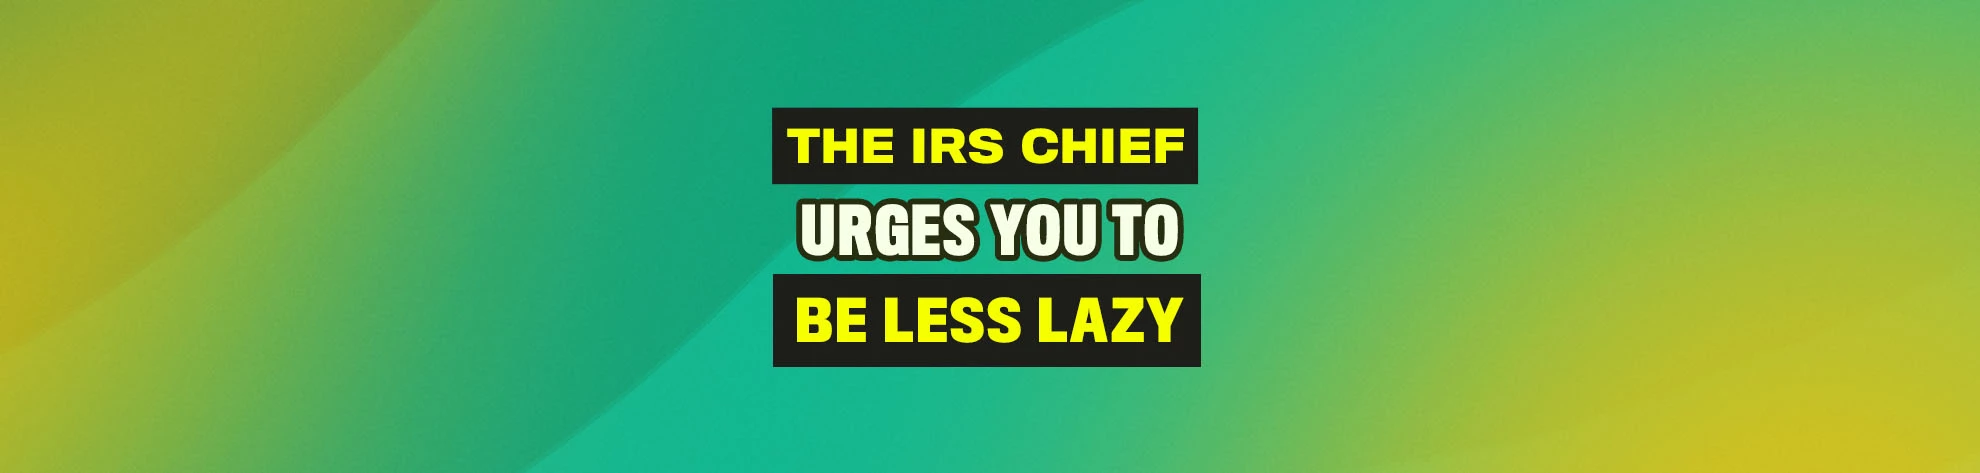 irs chief and accountants